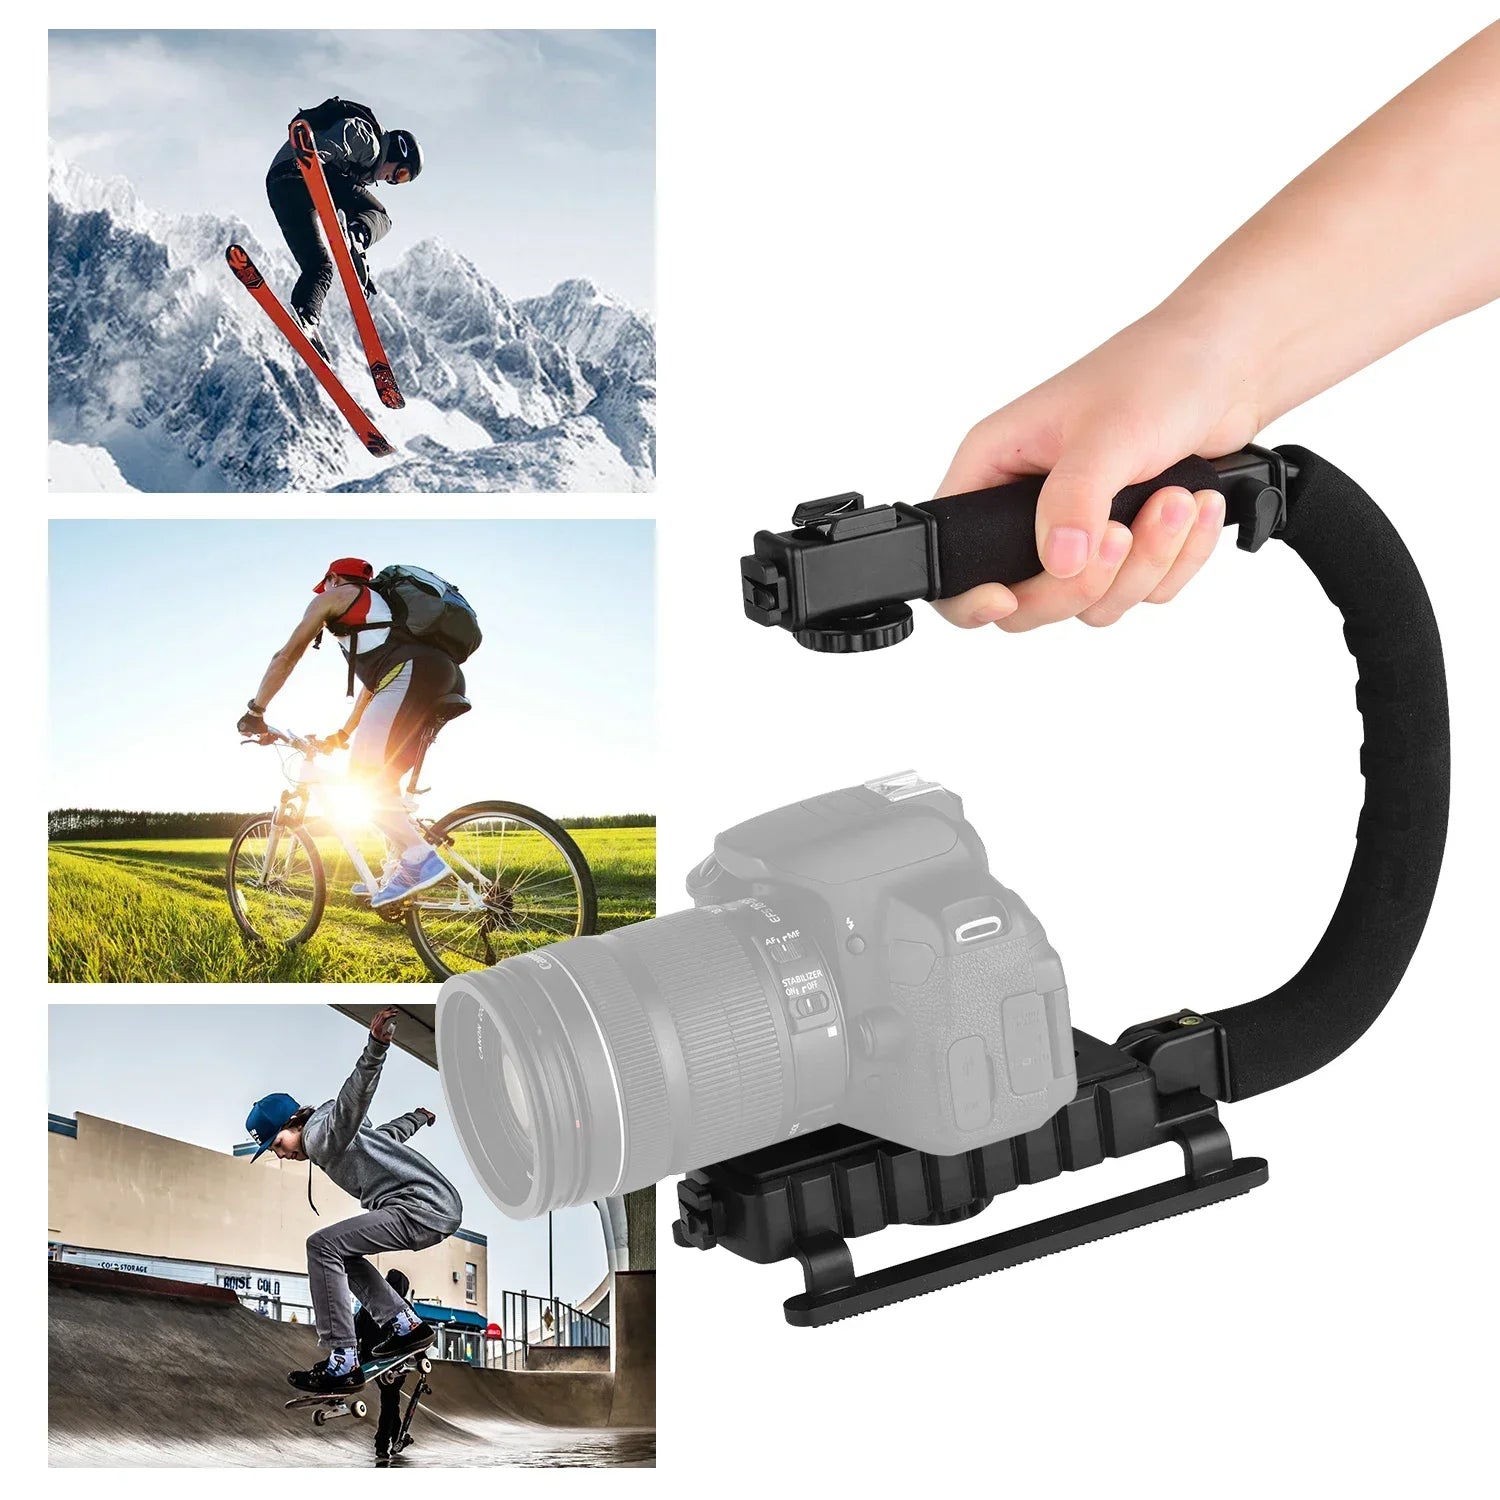 Upgraded C-Shaped Stabilizer: Universal Mount, Cold-Shoe & Durable Design